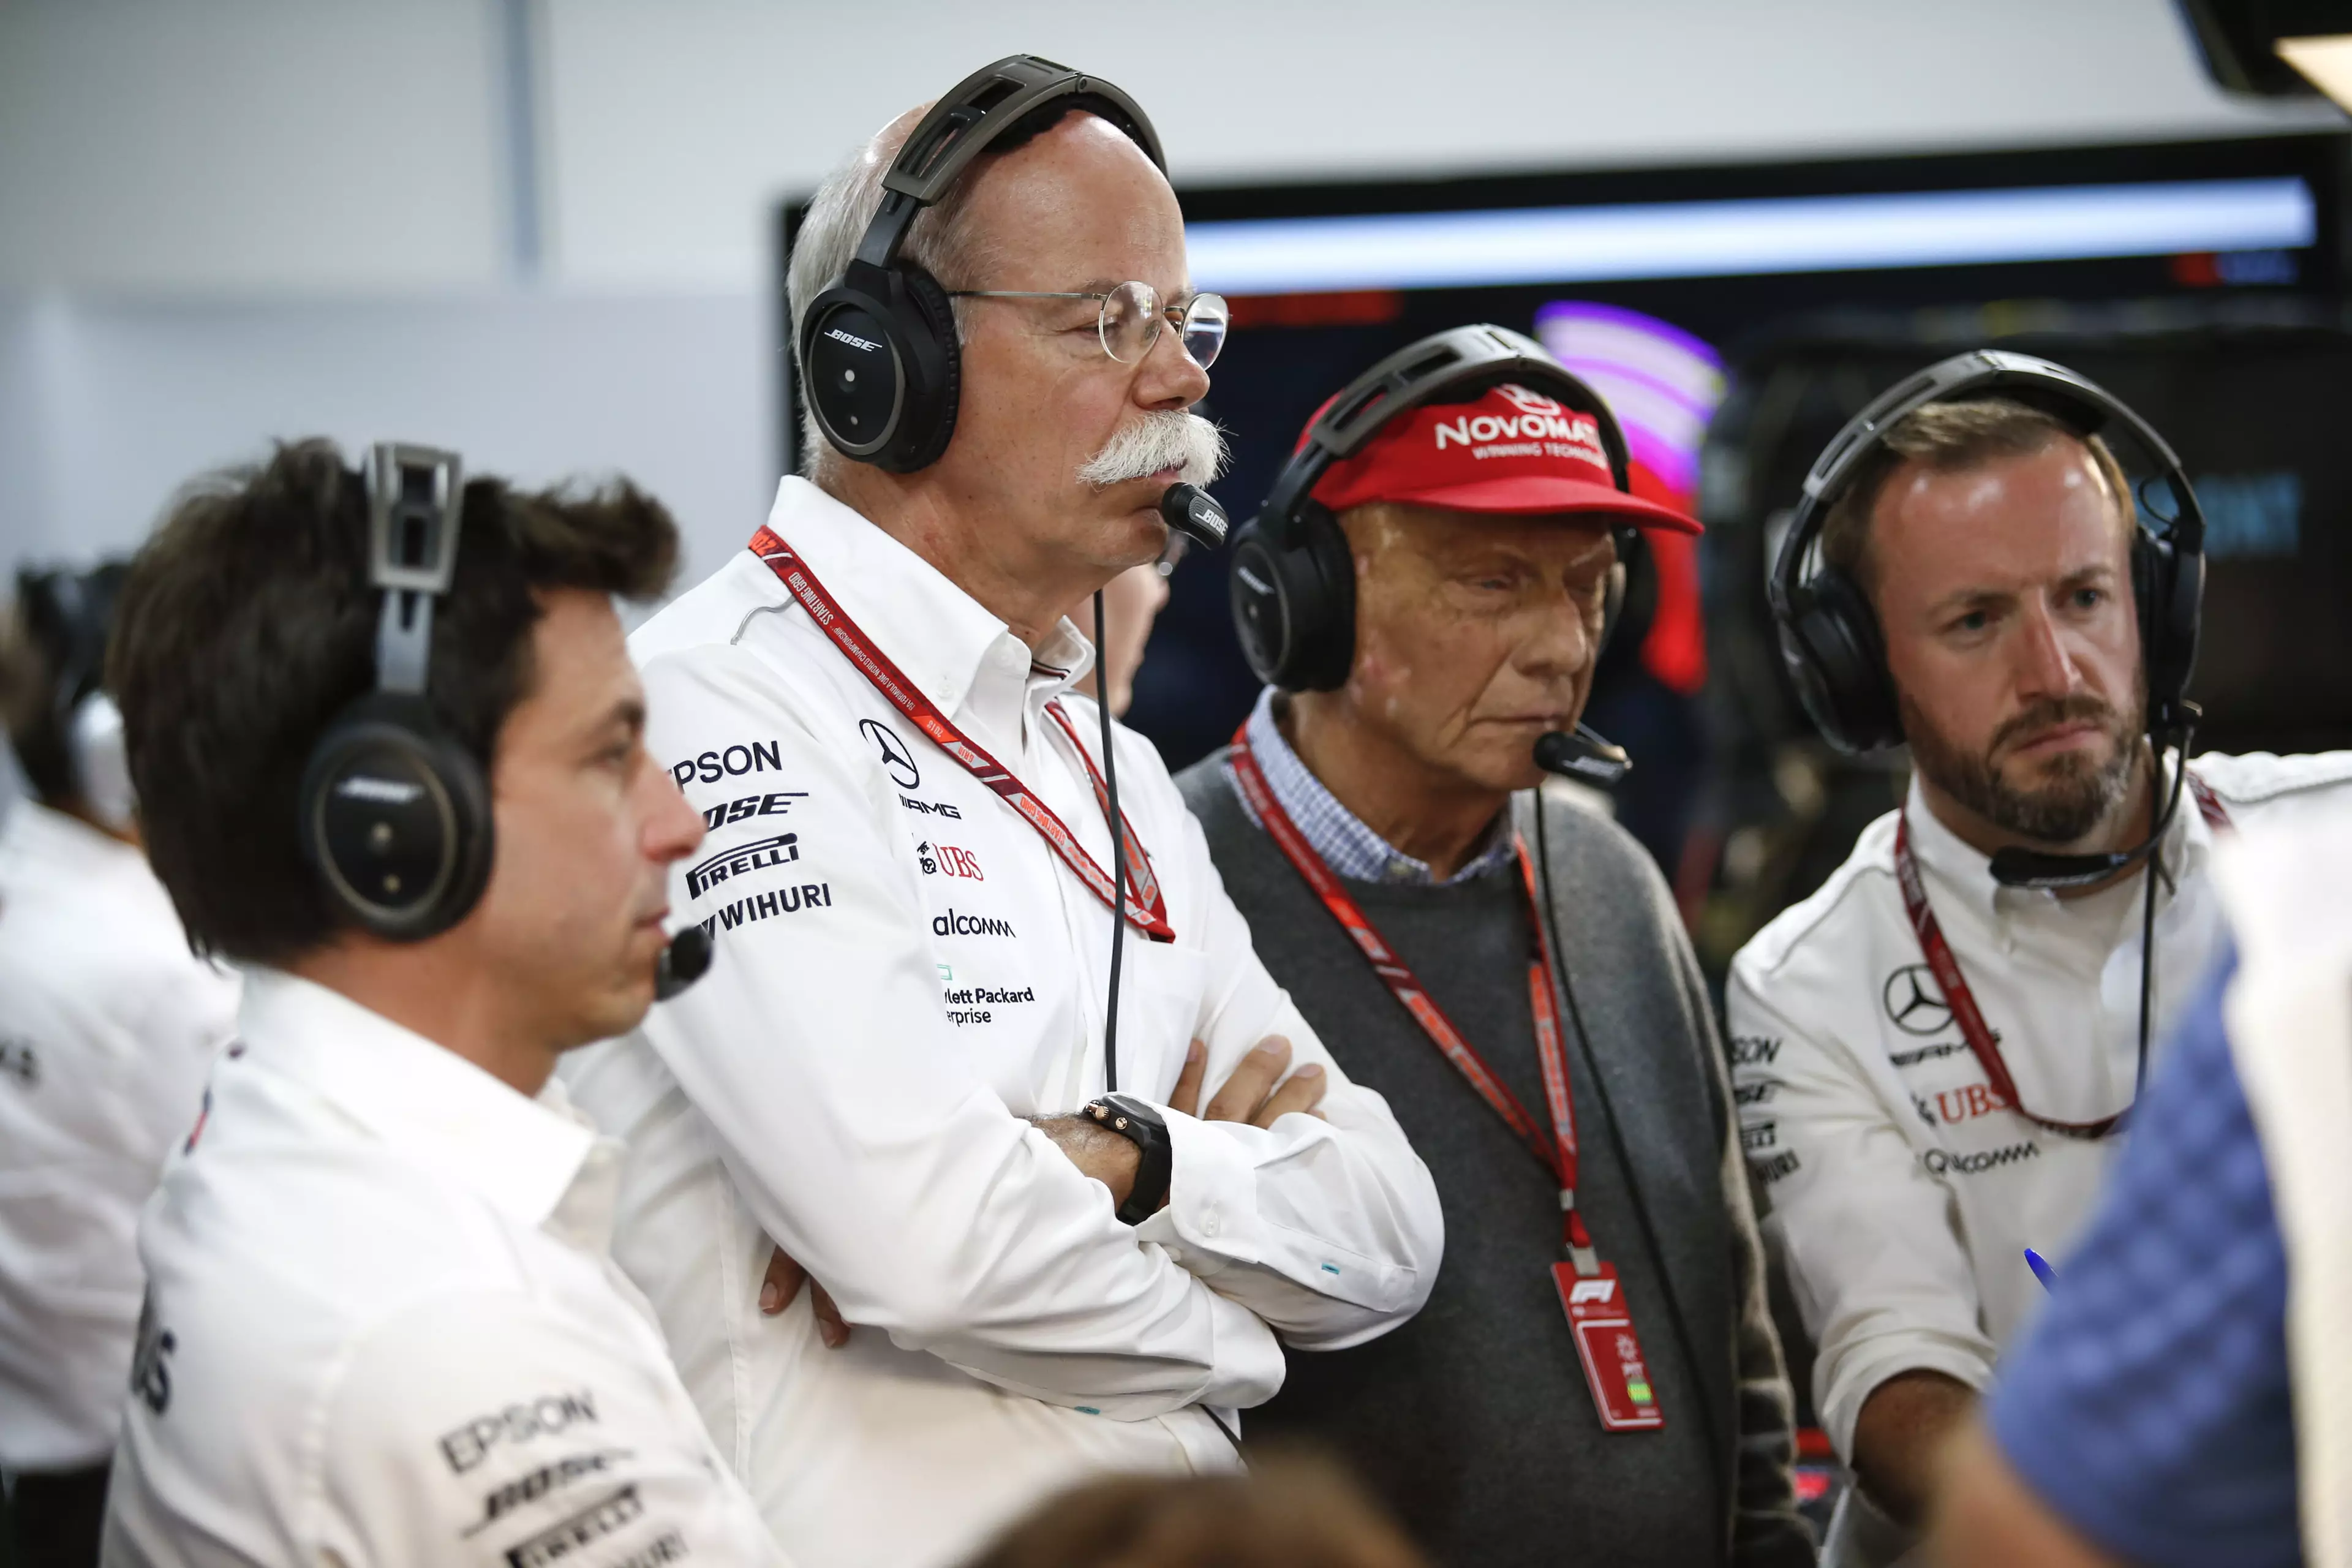 Lauda with the Mercedes team. Image: PA Images